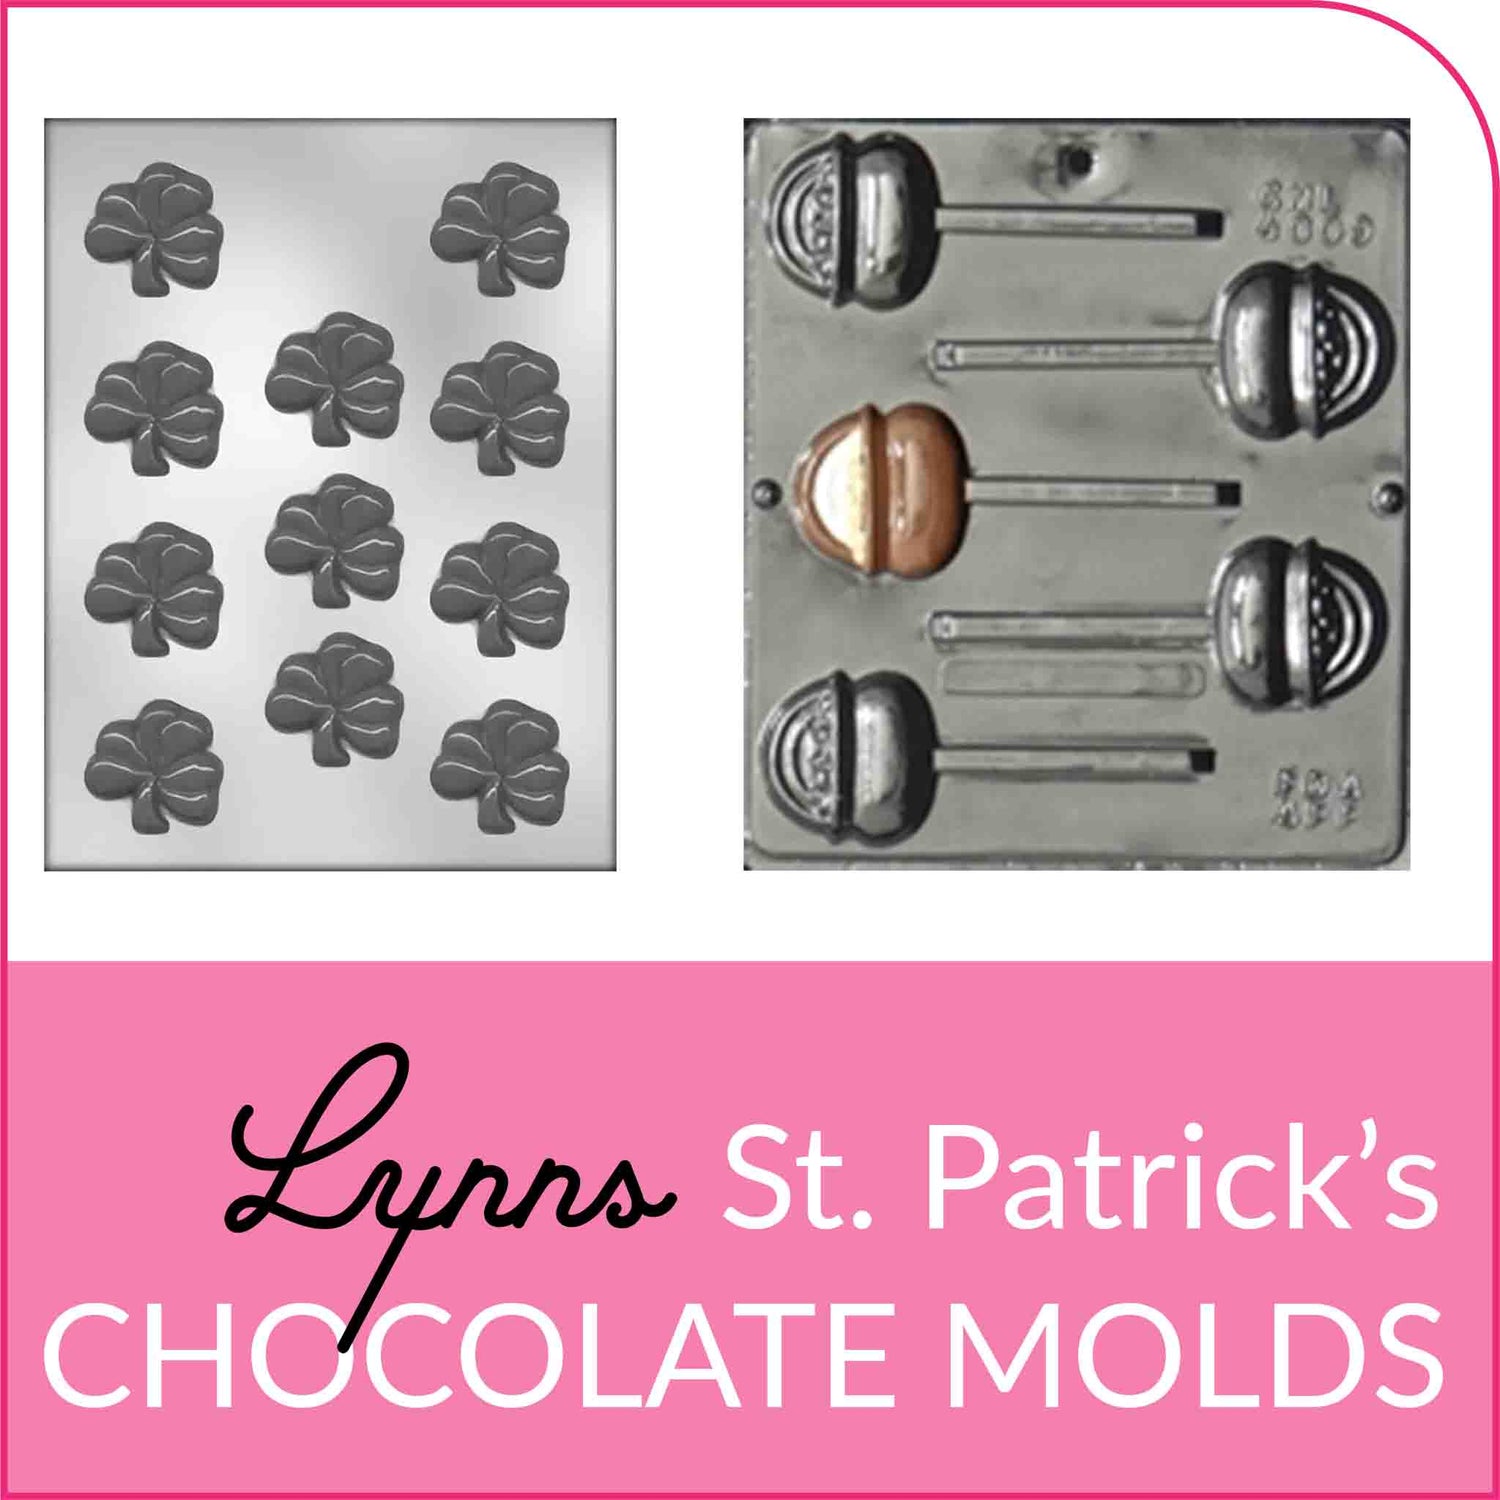 Shop St Patrick's Day Chocolate Molds at Lynn's